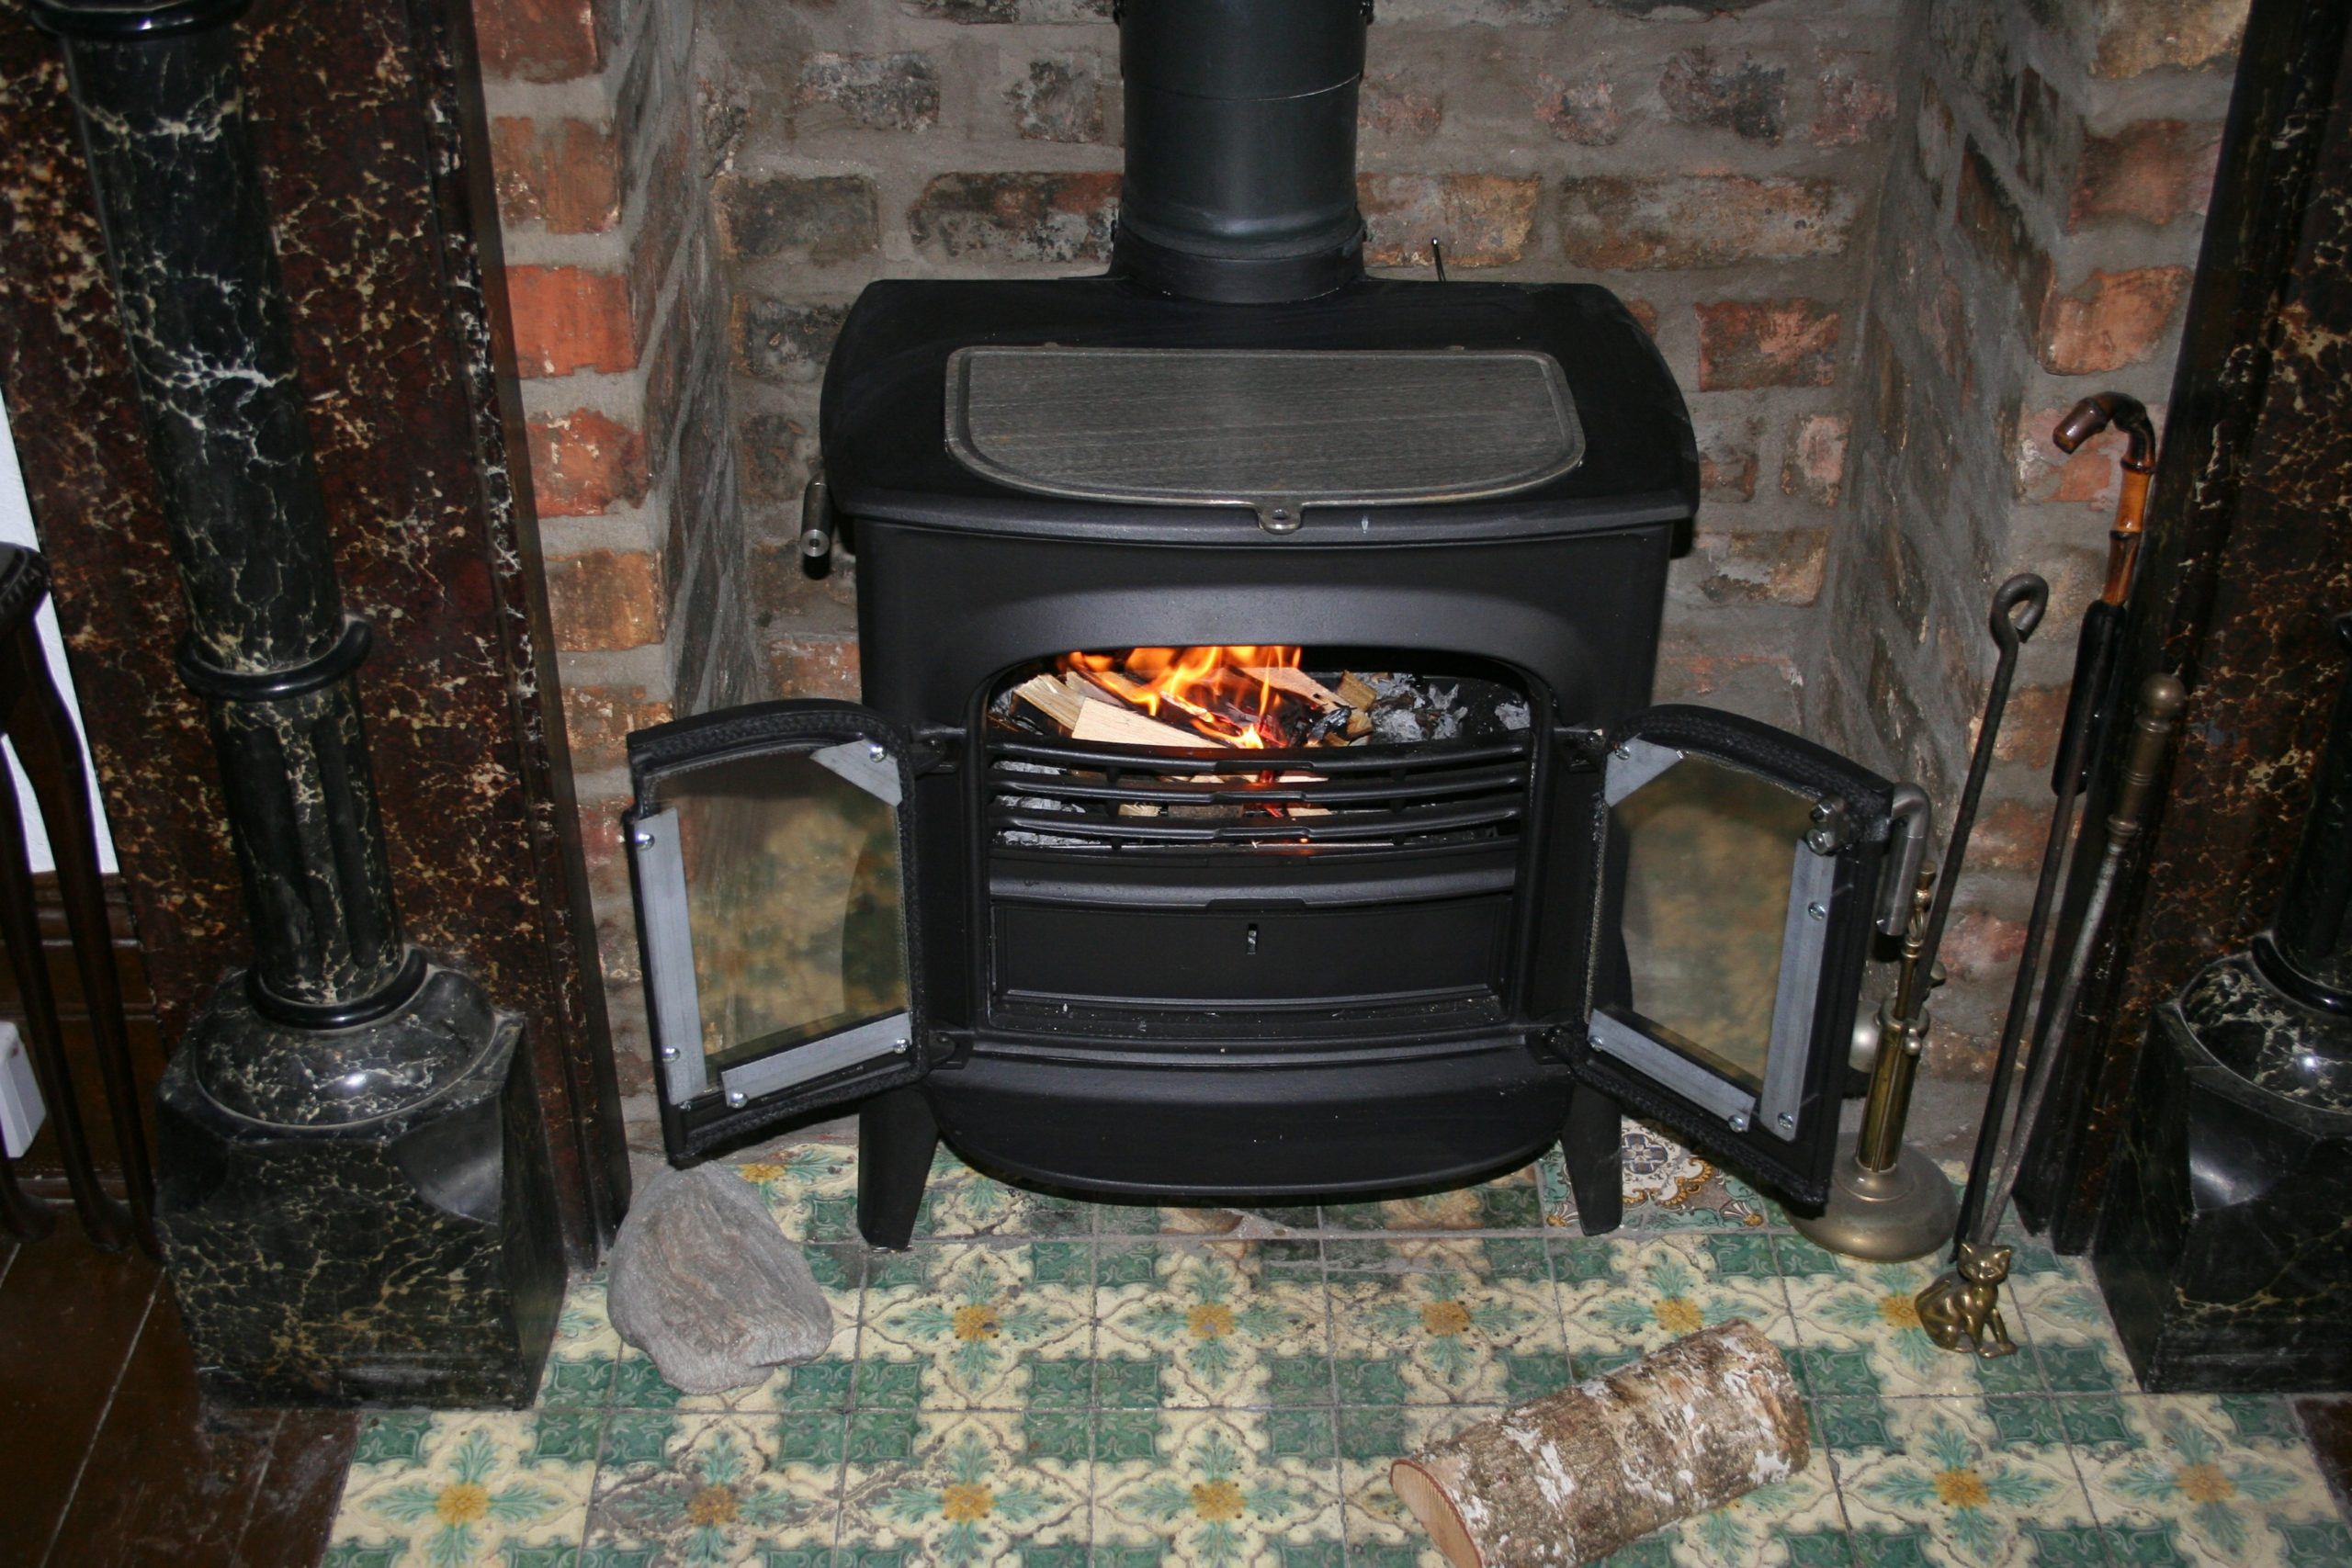 Why does my Wood Stove Smell when Not Used